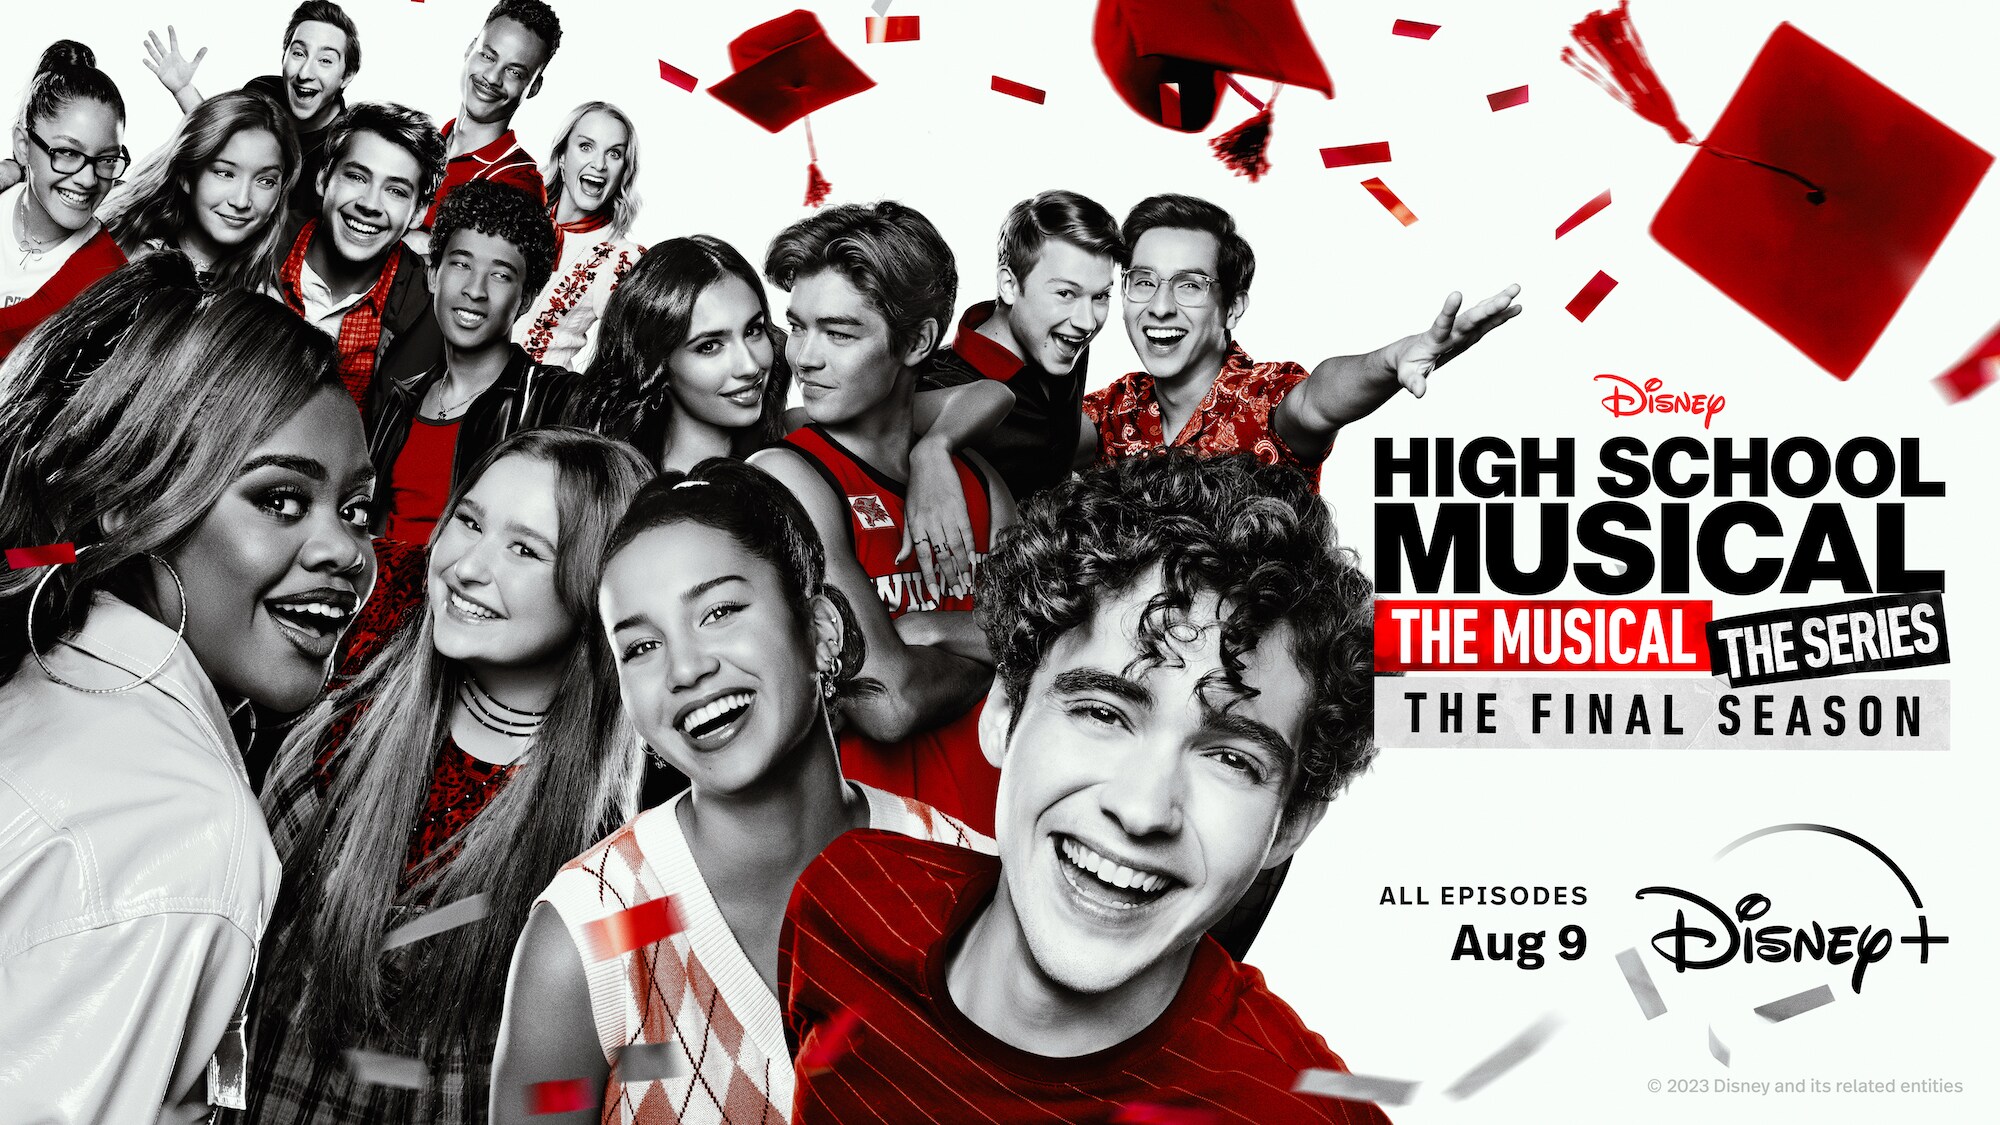 “High School Musical: The Musical: The Series” To Premiere Fourth And Final Season August 9 On Disney+